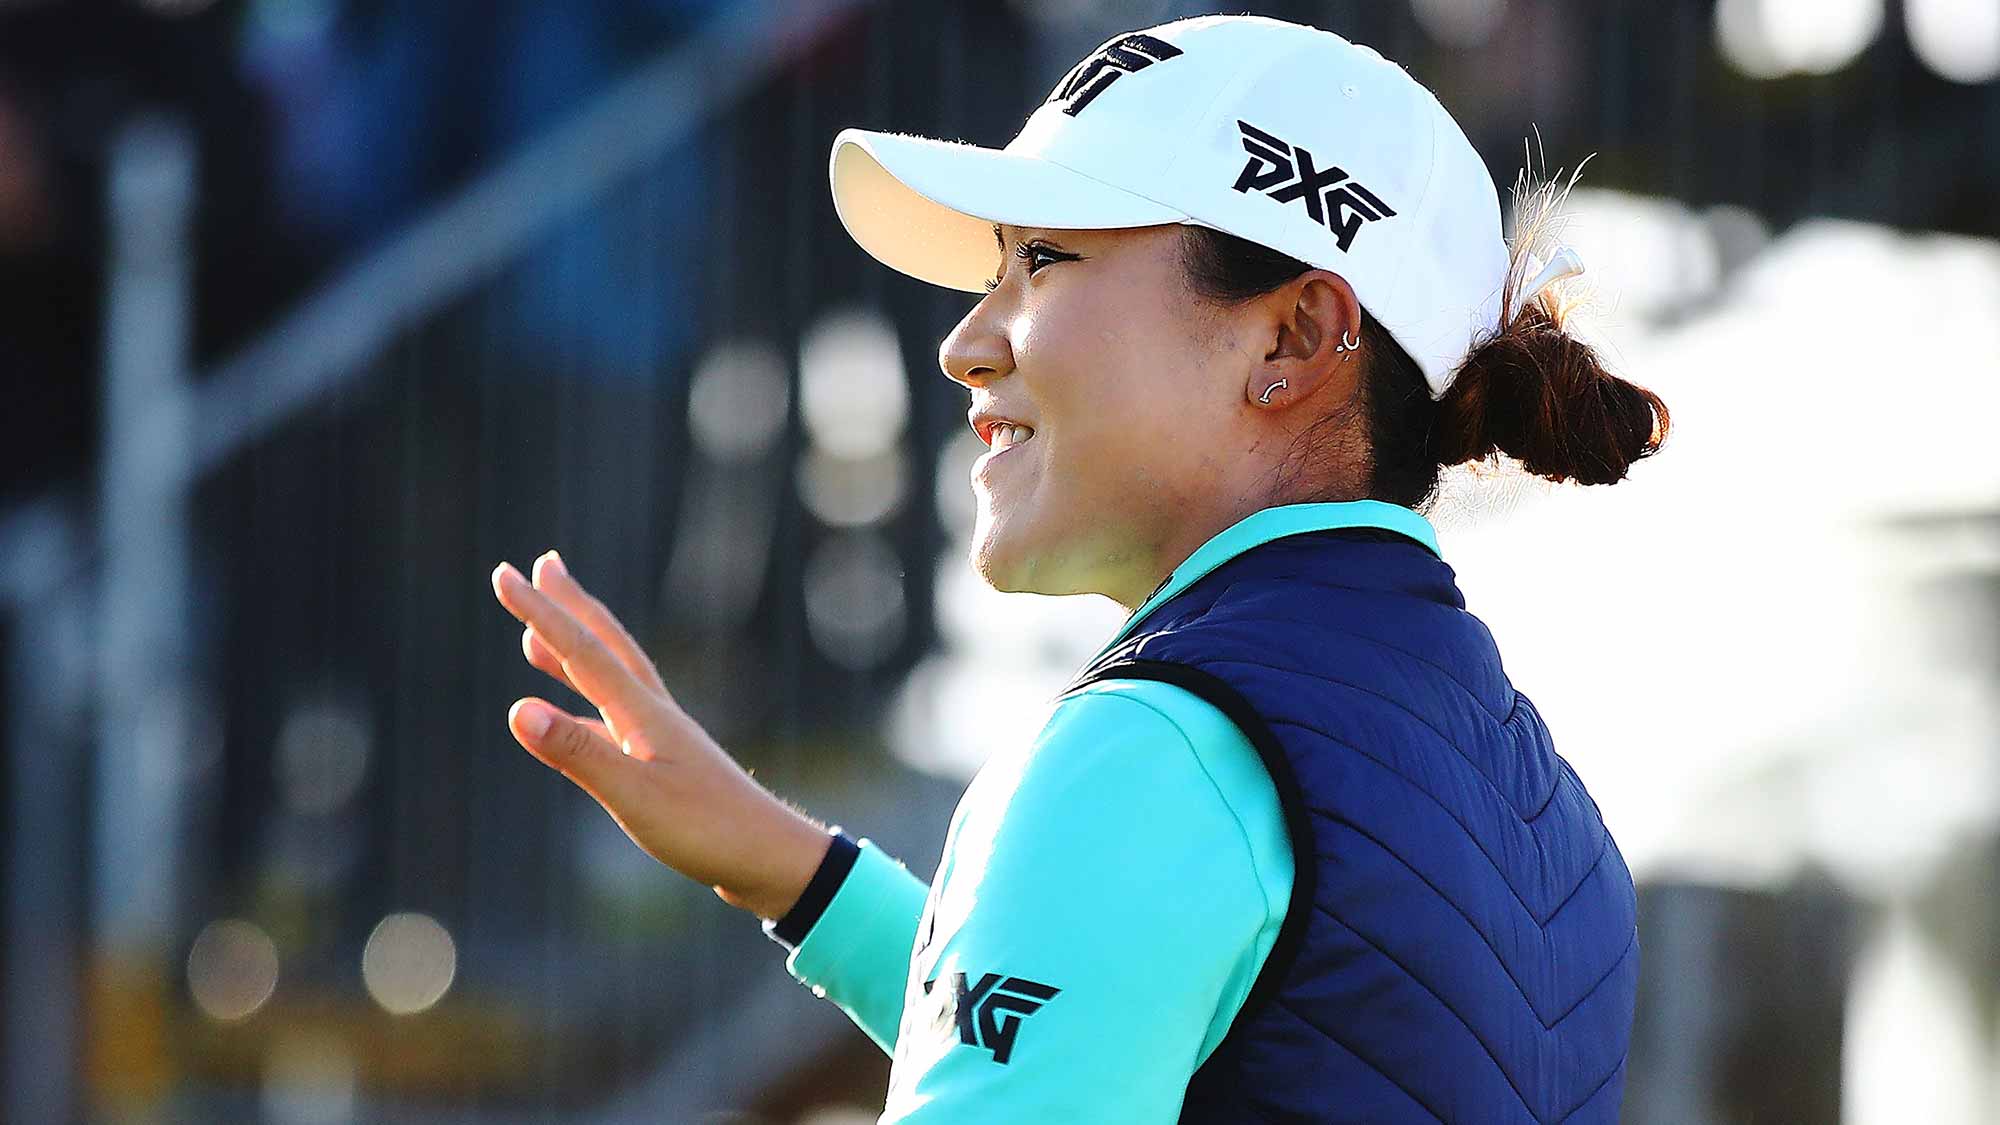 Lydia Ko of New Zealand acknowledges the crowd during day one of the McKayson New Zealand Women's Open at Windross Farm